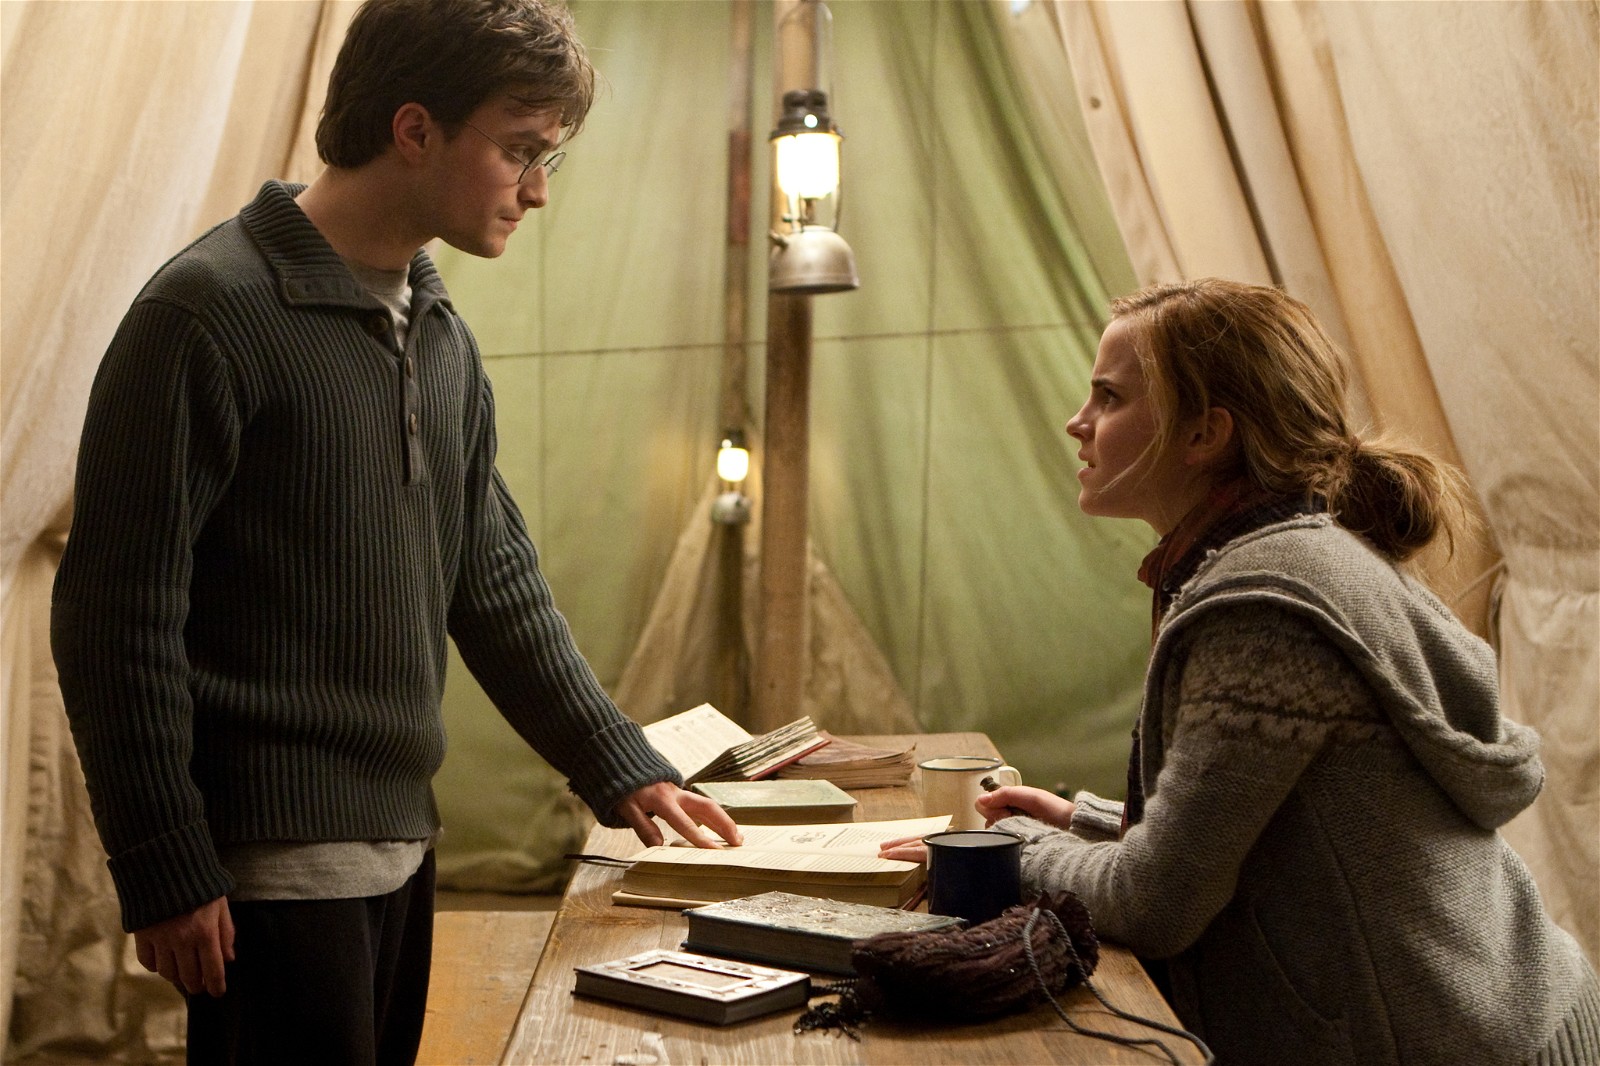 Daniel Radcliffe and Emma Watson in a still from Harry Potter and The Deathly Hallows: Part 1